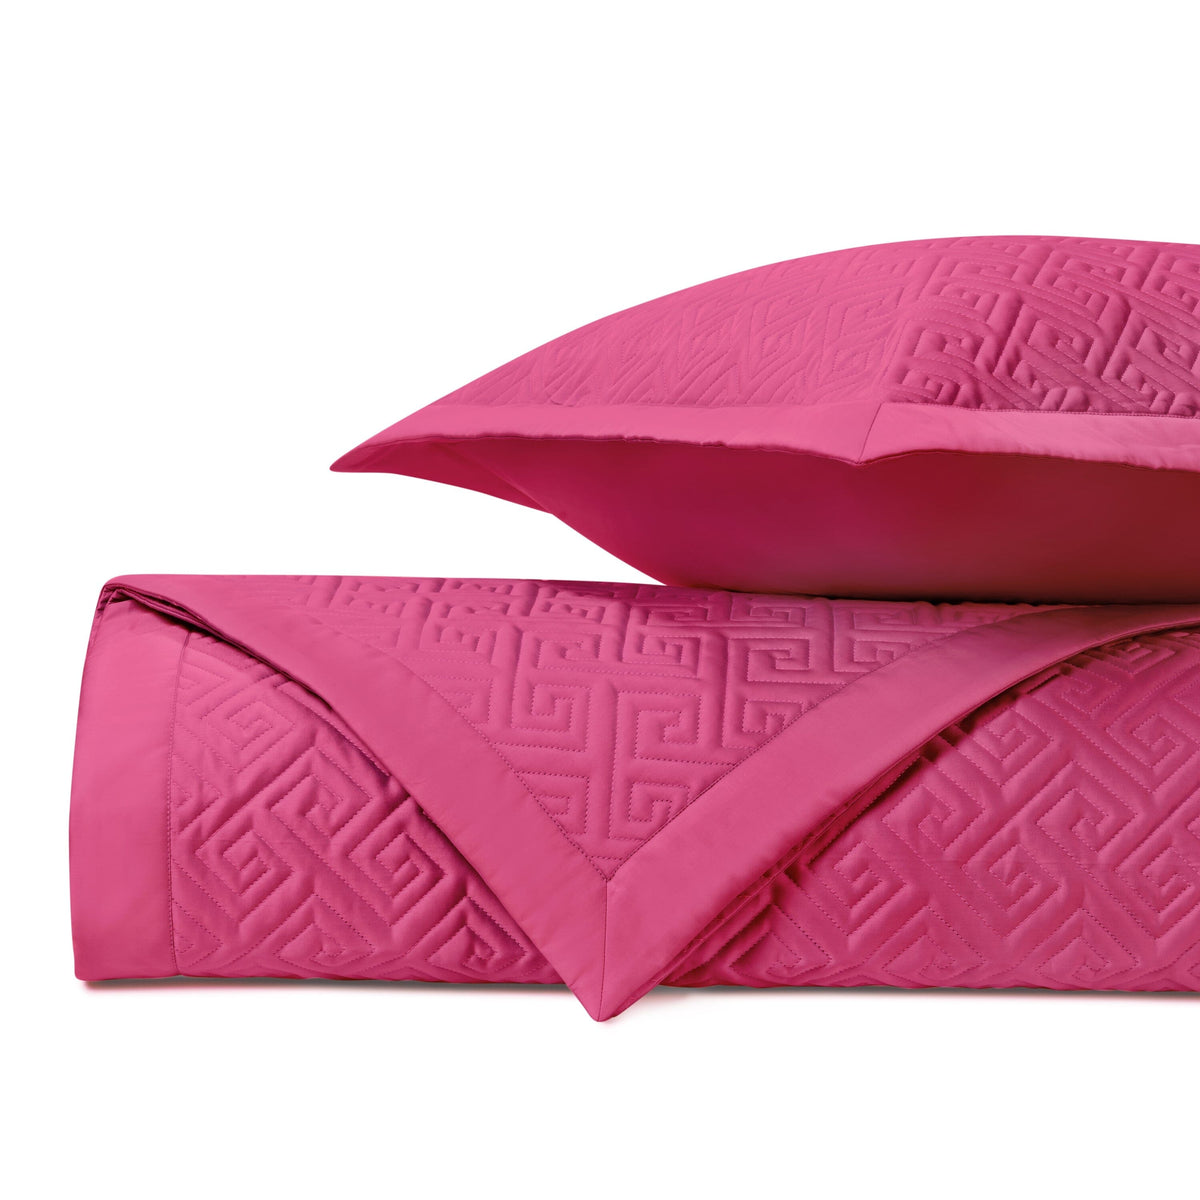 TROY Quilted Coverlet in Bright Pink by Home Treasures at Fig Linens and Home